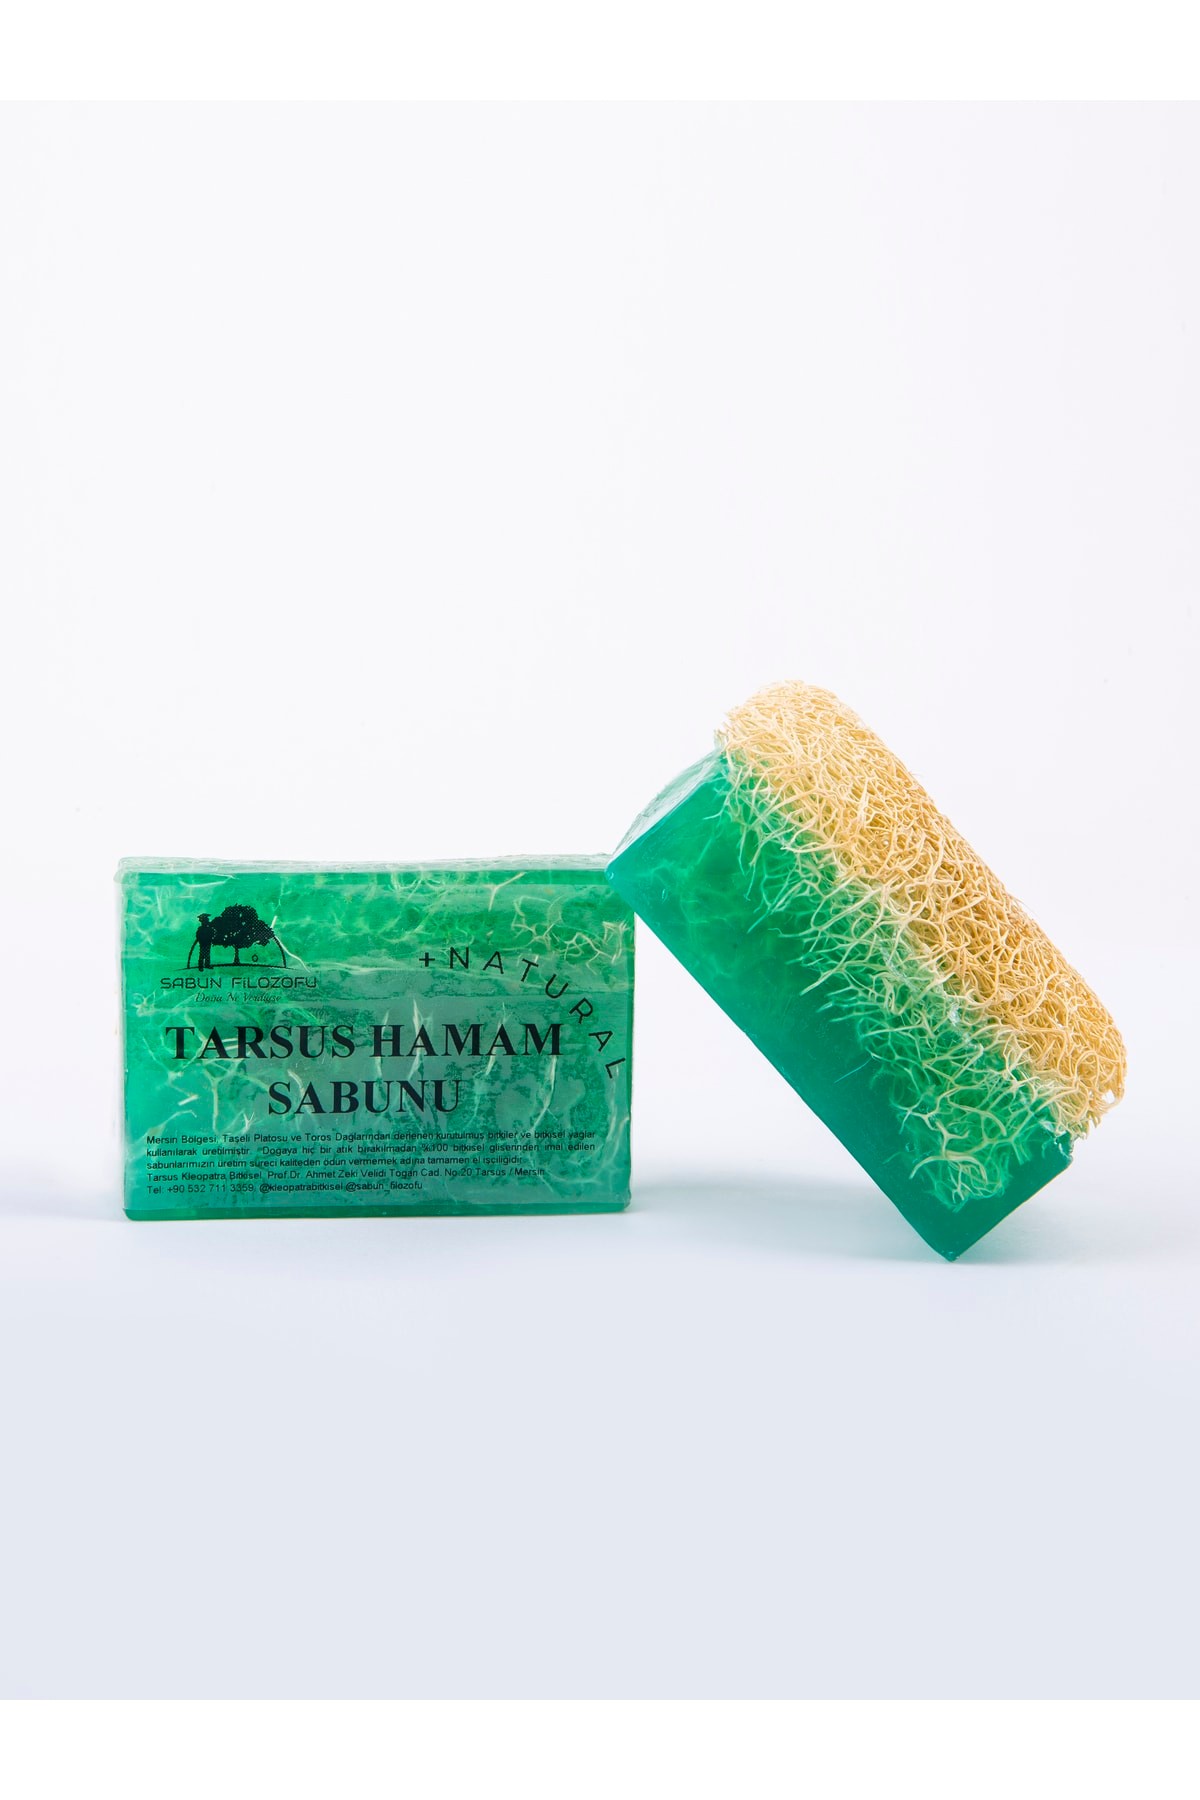 Tarsus Hamam Soap (130gr. Extra Large Size with zucchini fibers)